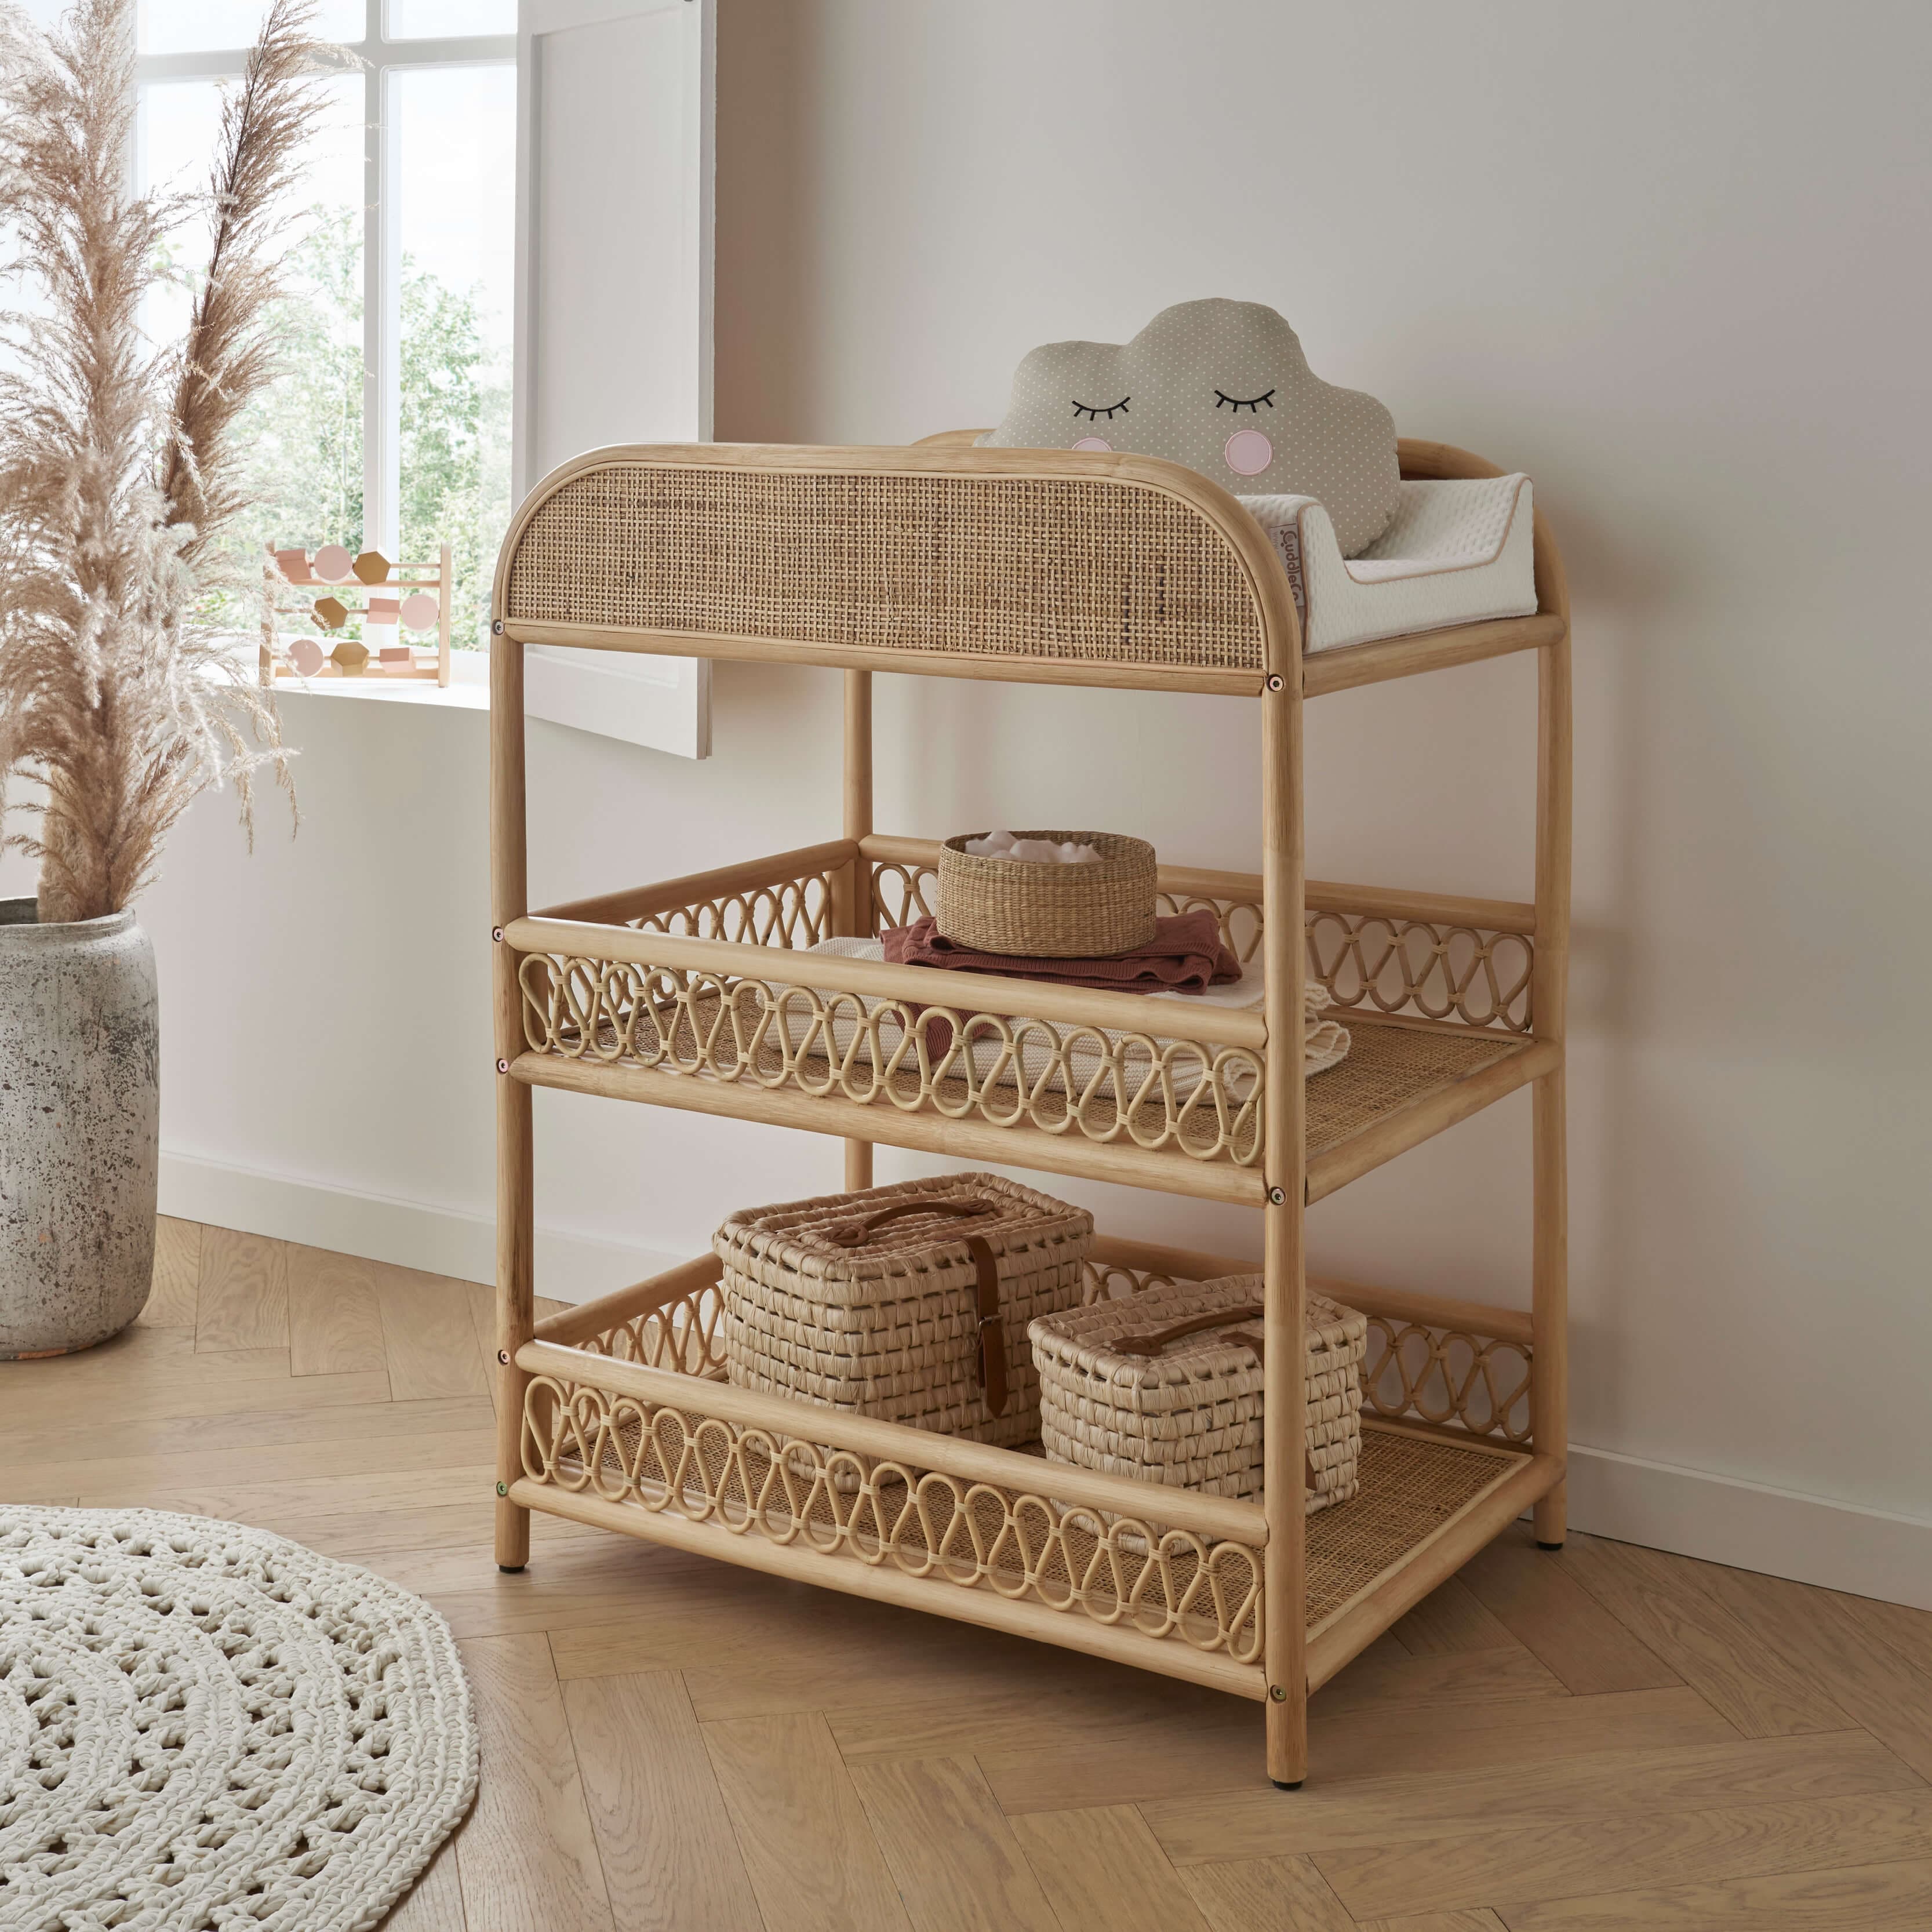 Cuddleco Aria 2 Piece Nursery Furniture Set - Rattan -  | For Your Little One